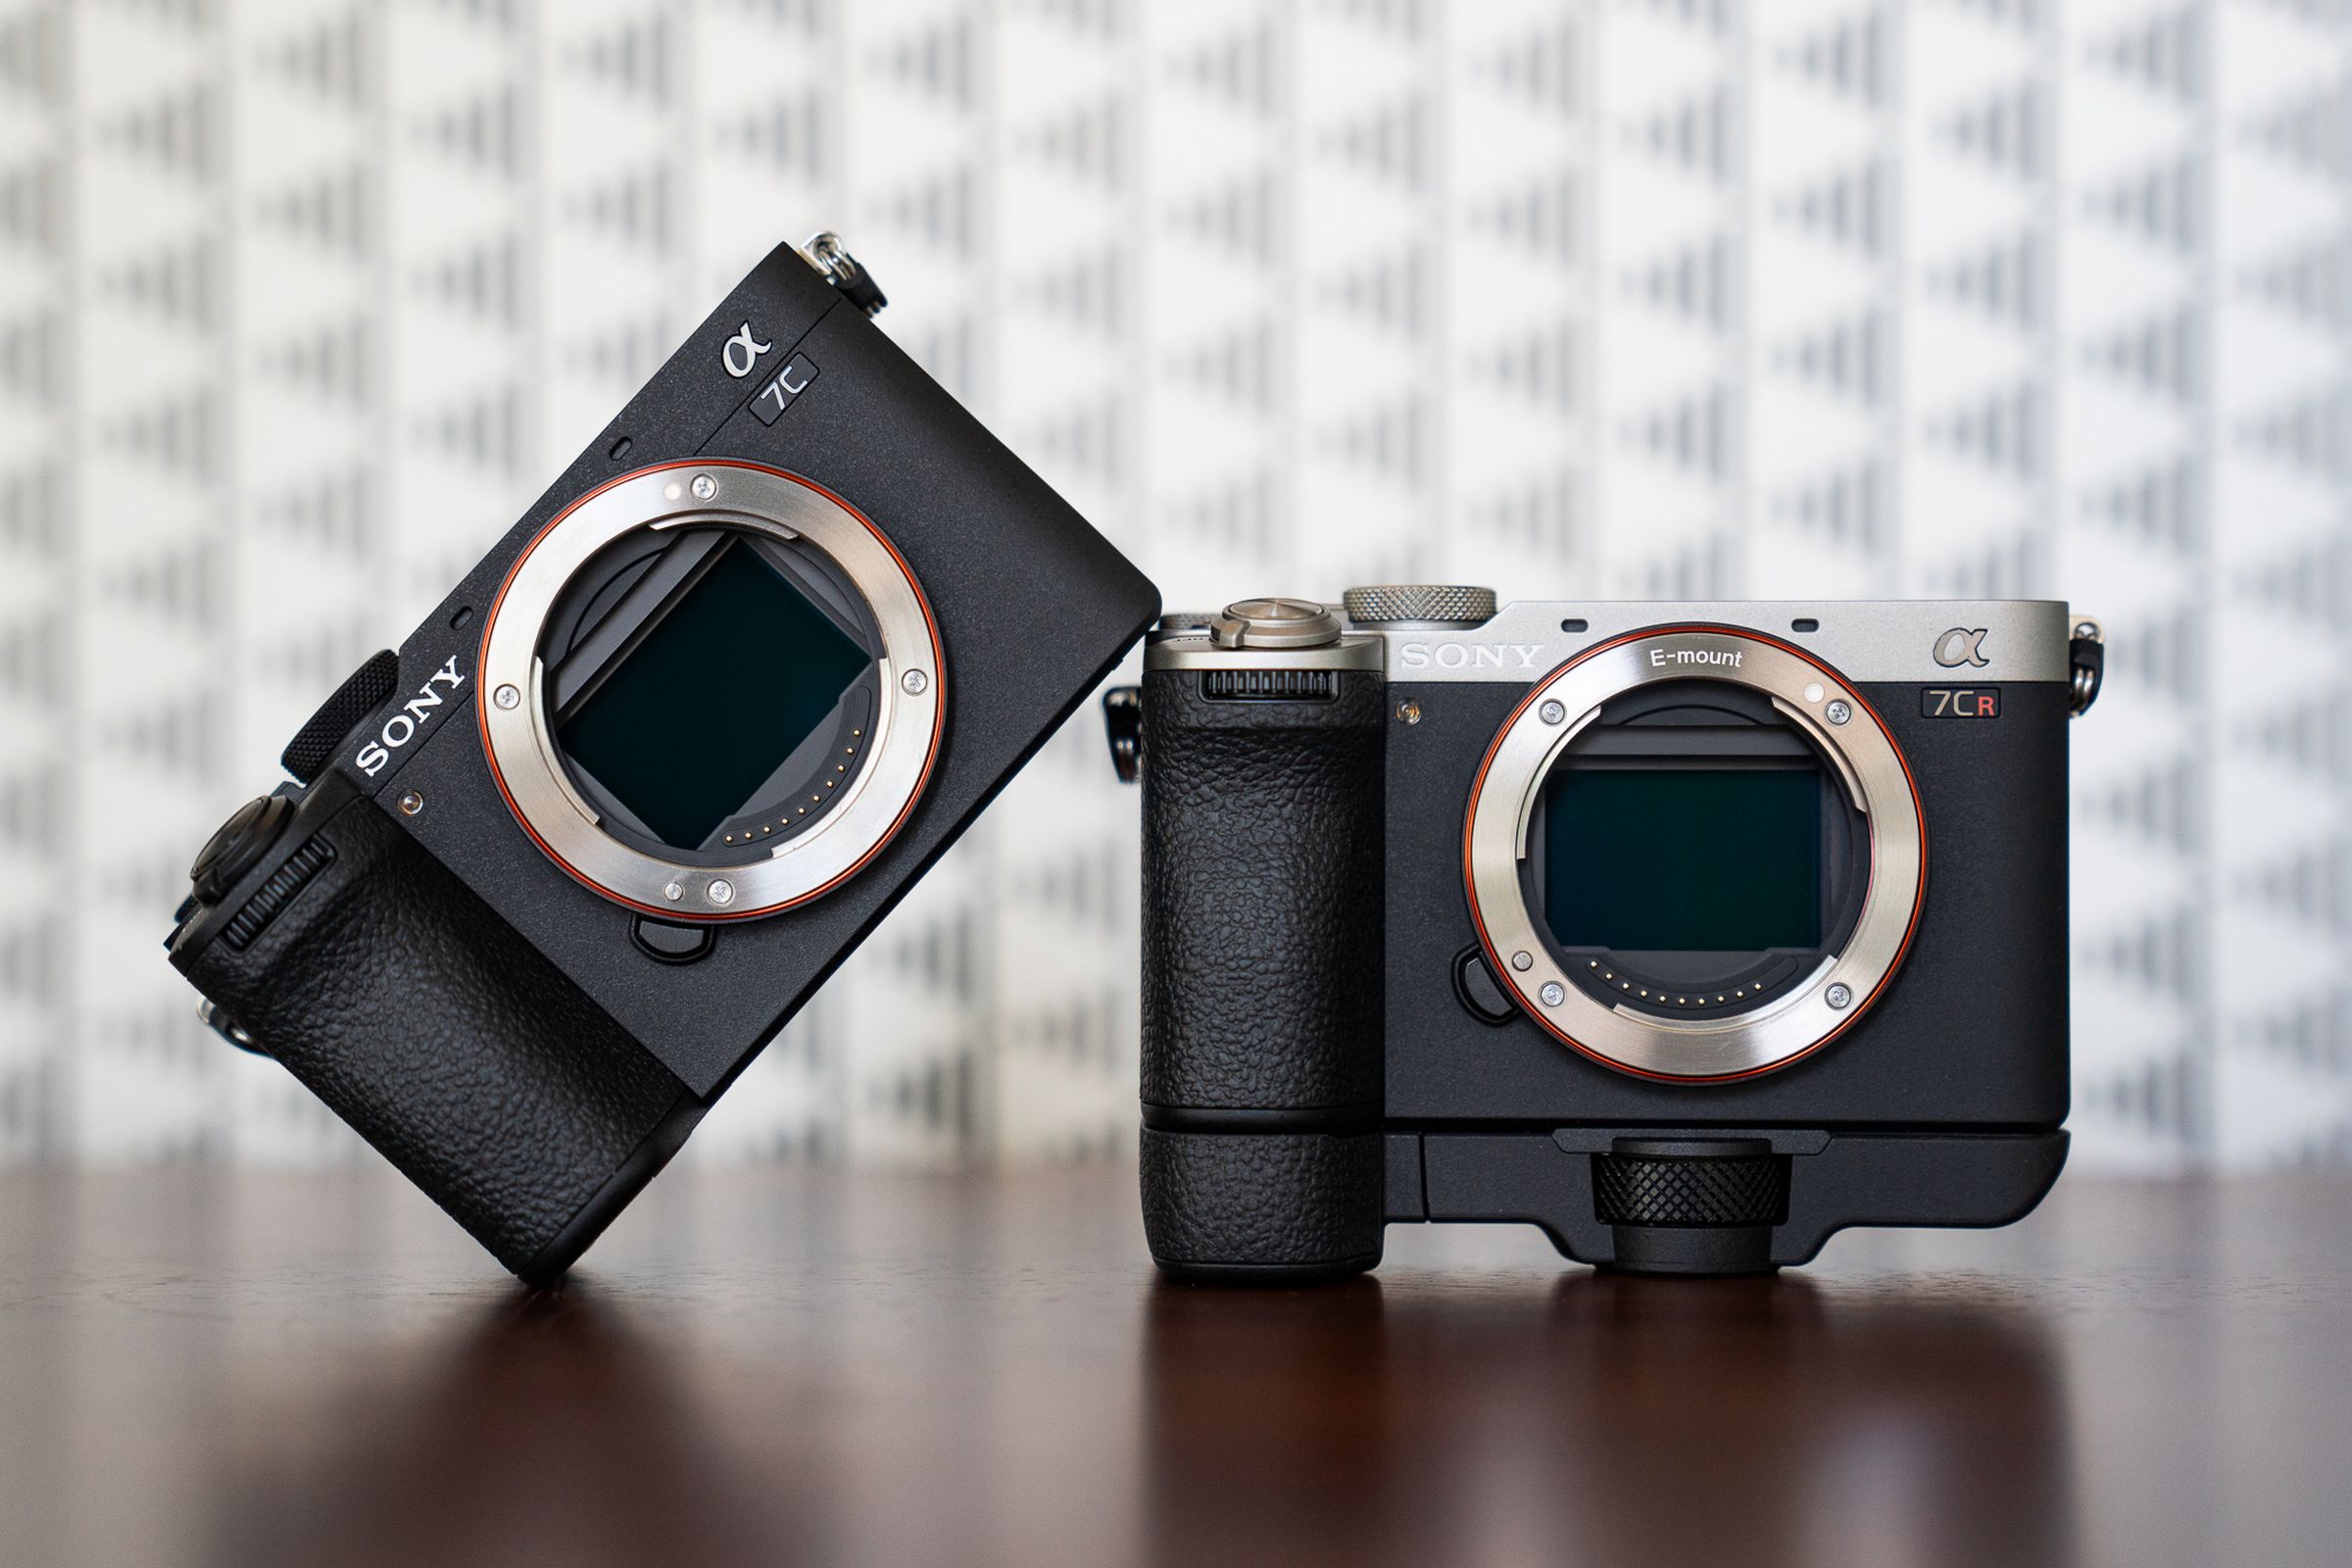 The Sony A7C II and A7C R cameras, sitting on a wood surface without lenses attached. The A7C II in black is angled and resting one side on the silver / black A7C R, which is mounted to its own handgrip.